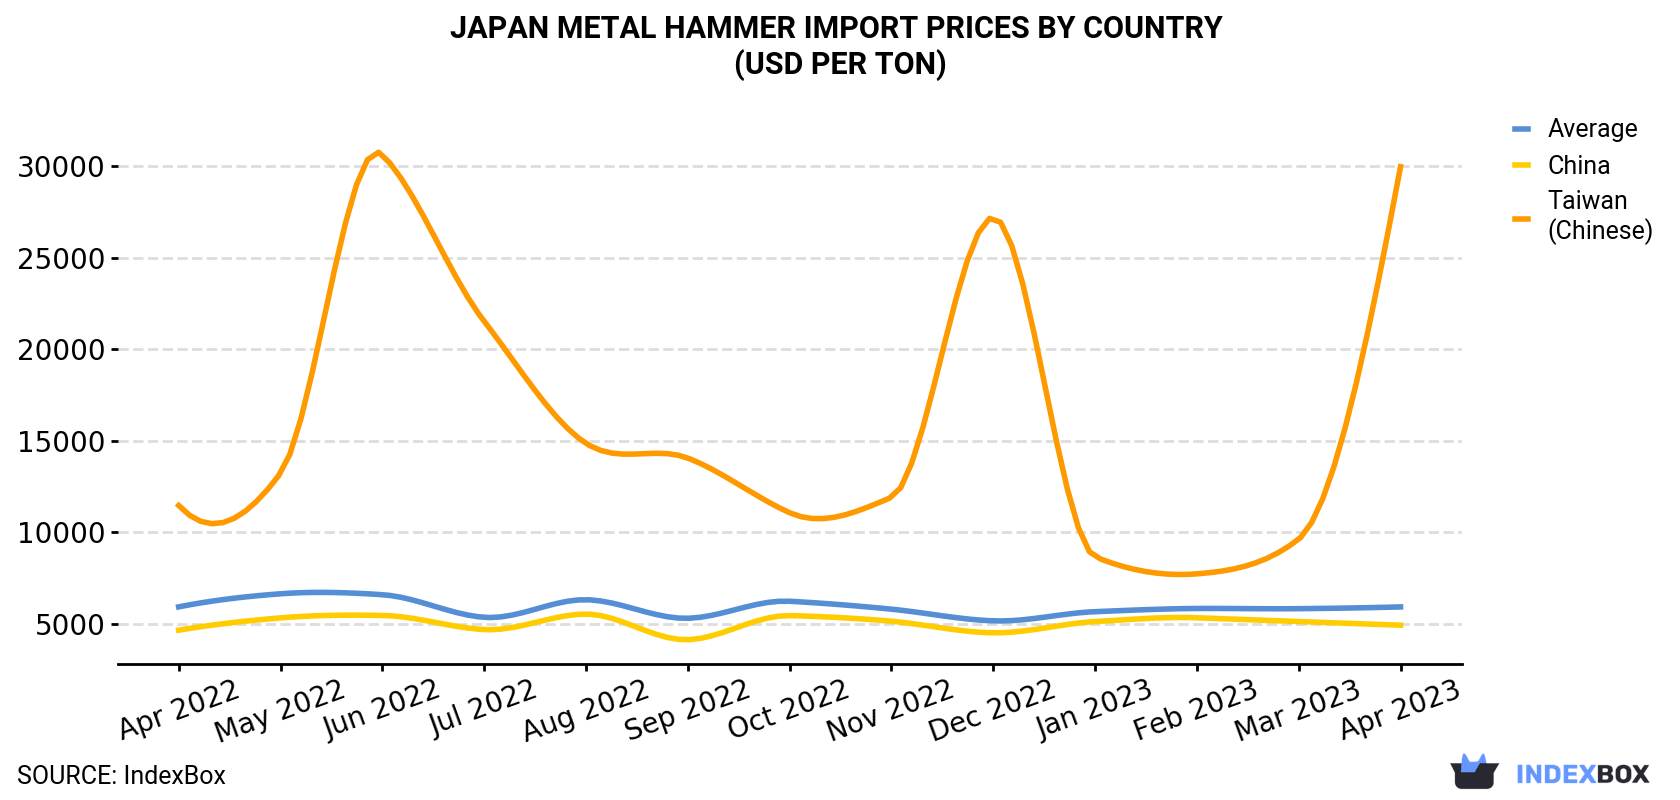 Japan Metal Hammer Import Prices By Country (USD Per Ton)